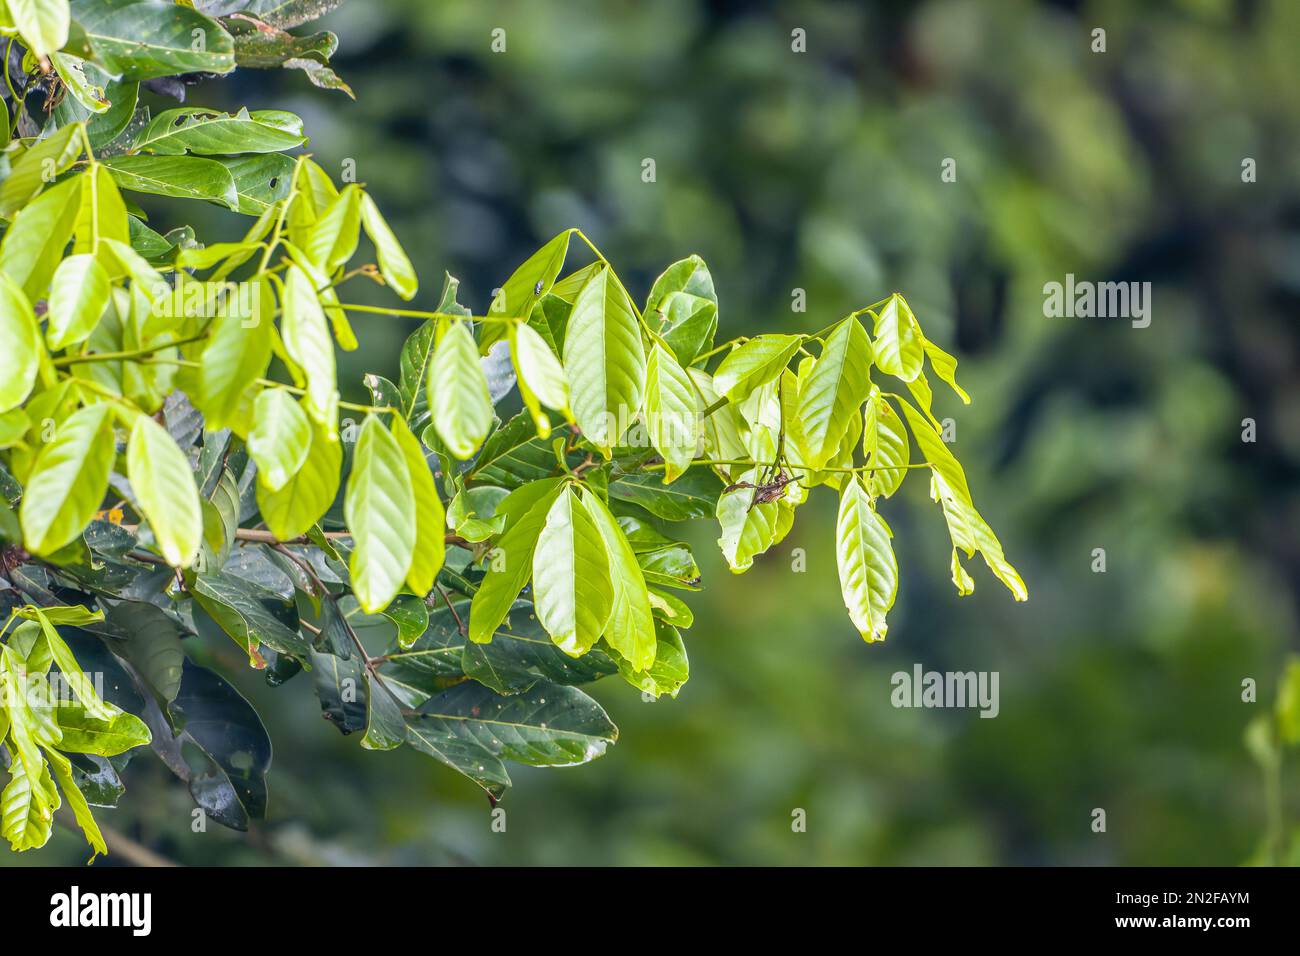 The tops of the rambutan tree branches with wide leaves are fresh green, the background is blurry green leaves Stock Photo